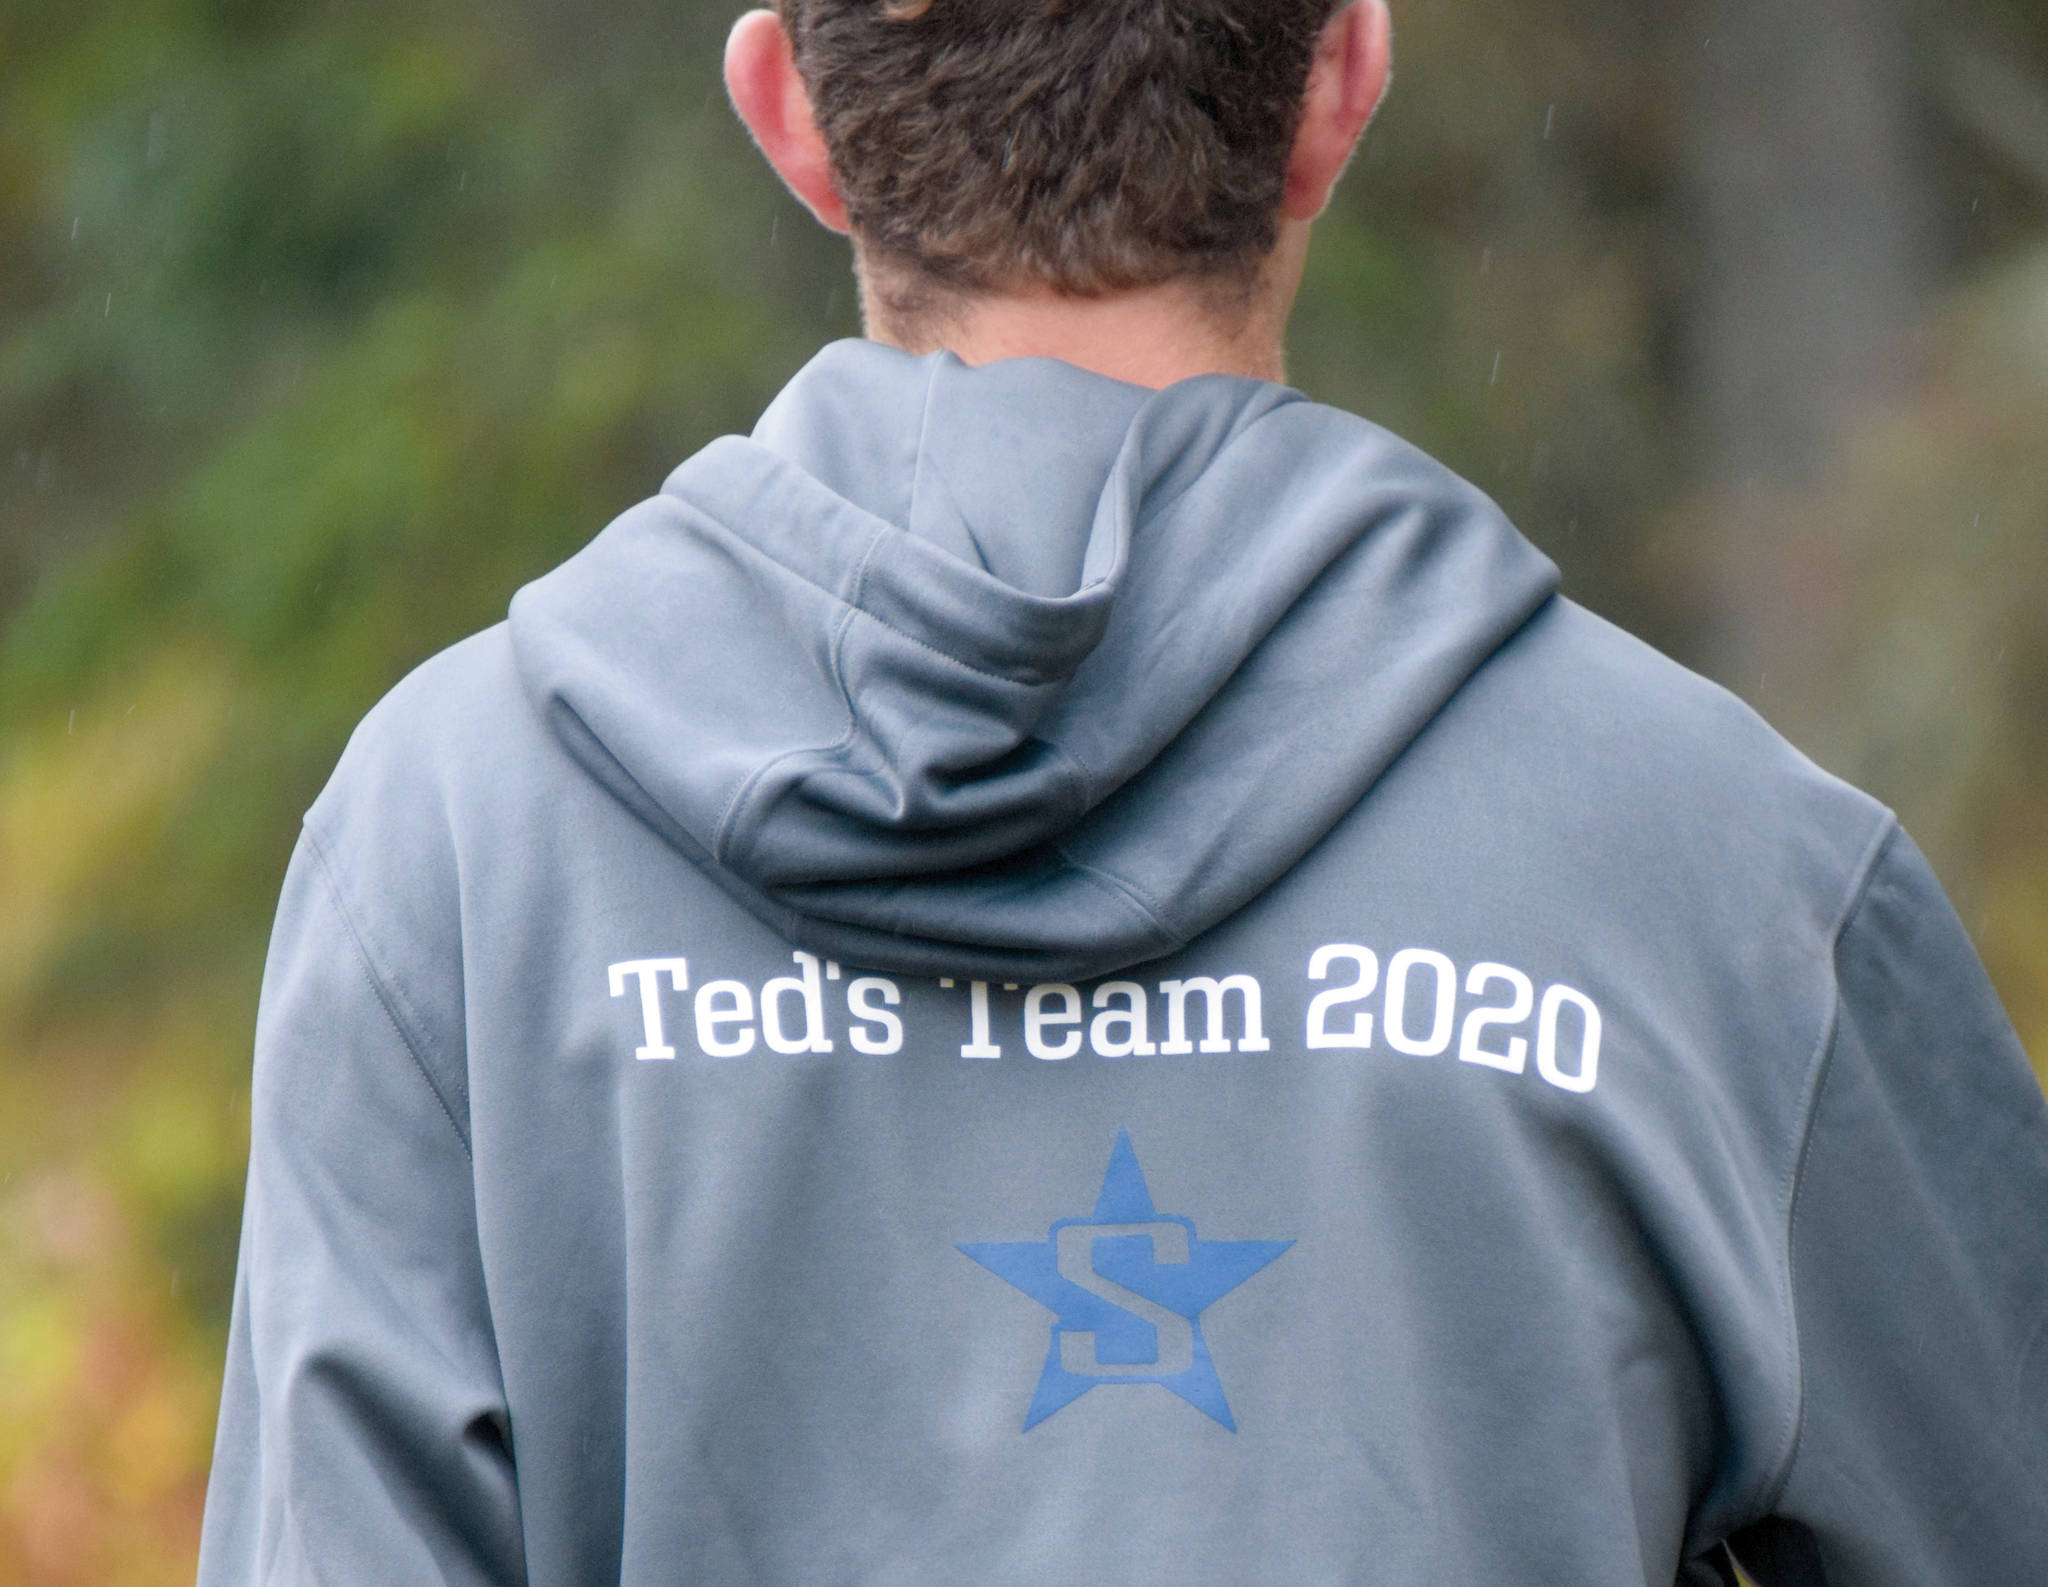 A Soldotna runner wears the team sweatshirt in honor of Ted McKenney, the team’s former coach who died of brain cancer this summer, at the Kenai Peninsula Borough cross-country meet Saturday, Sept. 26, 2020, at Tsalteshi Trails just outside of Soldotna, Alaska. (Photo by Jeff Helminiak/Peninsula Clarion)